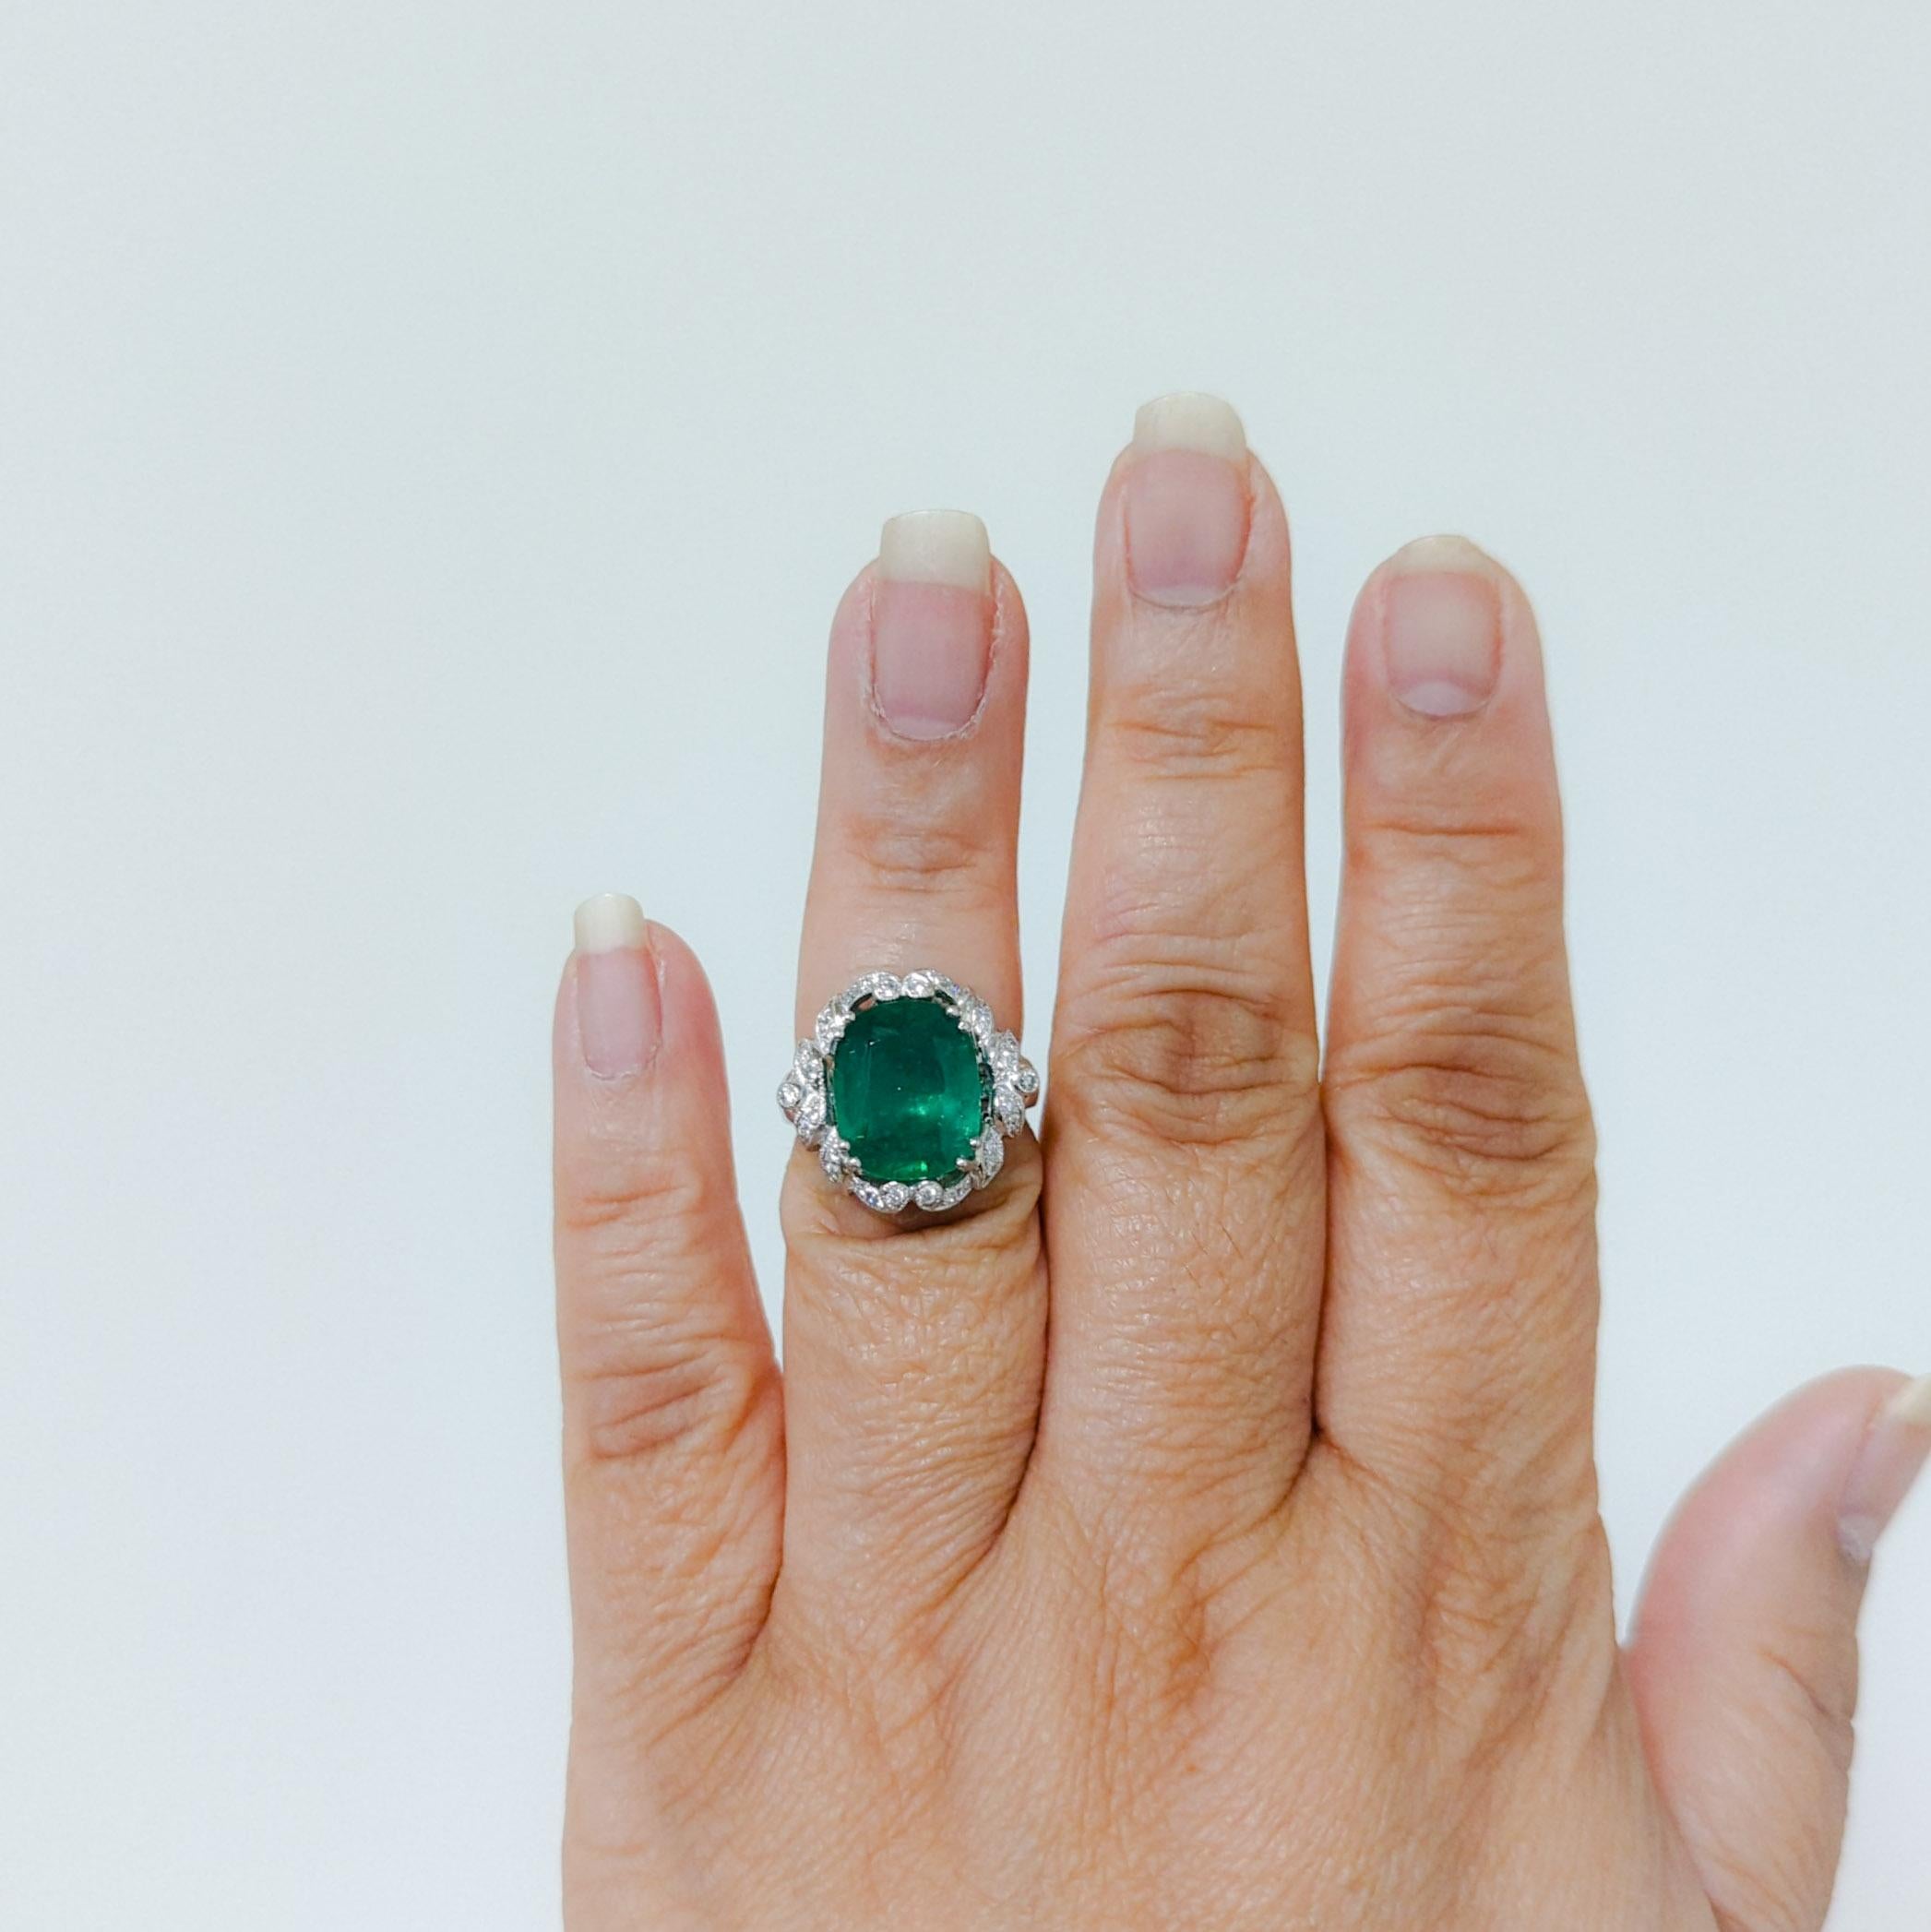 Beautiful 5.61 ct. emerald oval with good quality white diamond rounds.  Handmade in 18k white gold.  Ring size 5.75.